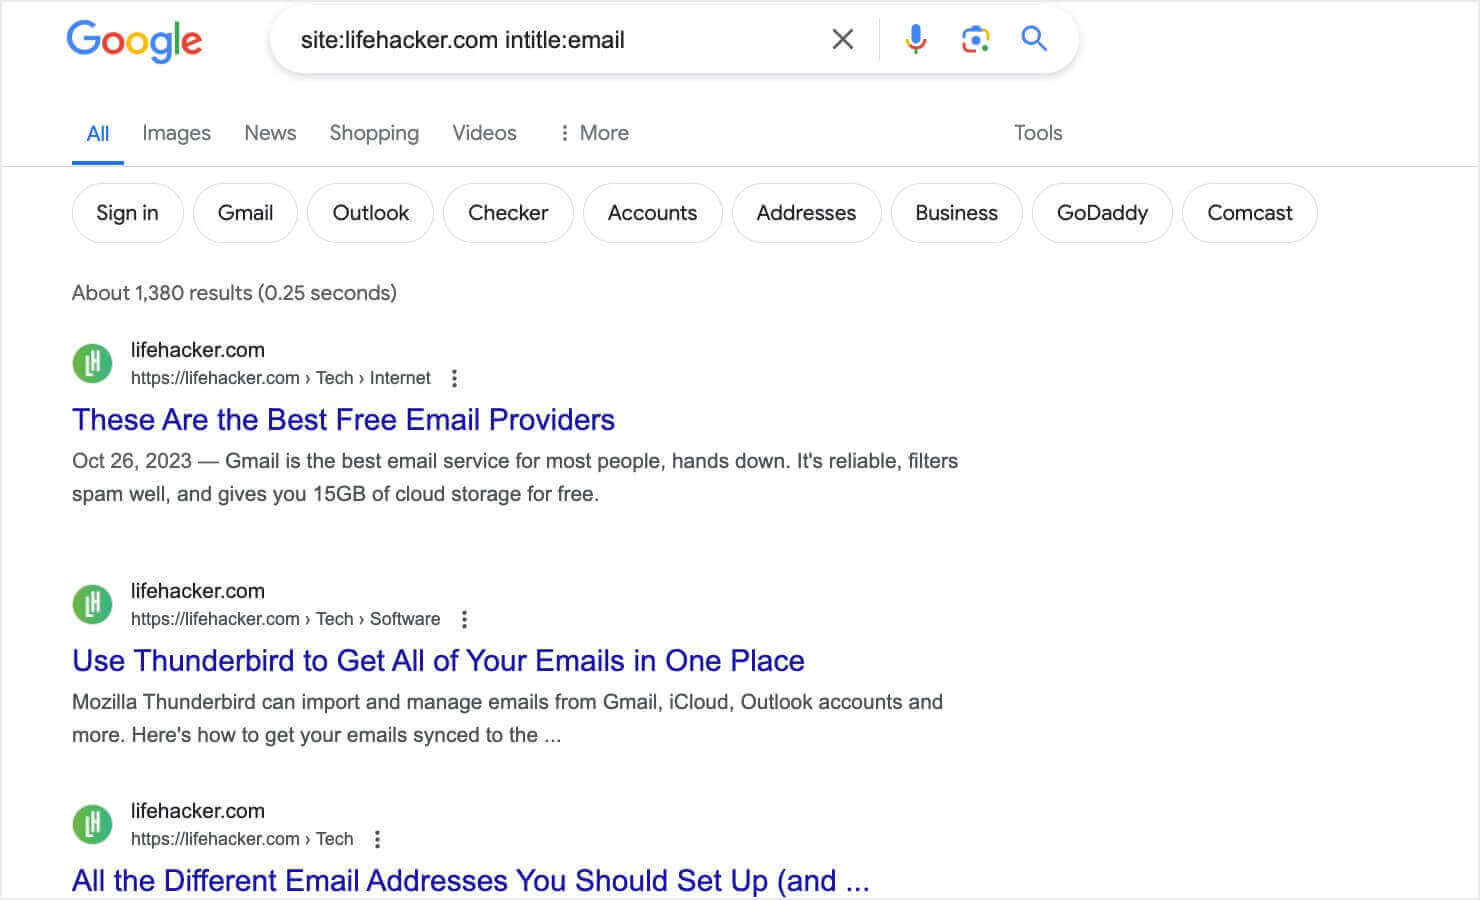 Screenshot of a Google search results page using the query 'site:lifehacker.com intitle:email'. The top 3 search results are Lifehacker articles titled "These Are the Best Free Email Providers," "Use Thunderbitd to Get All of Your Emails in One Place," and "All the Different Email Addresses You Should Set Up."